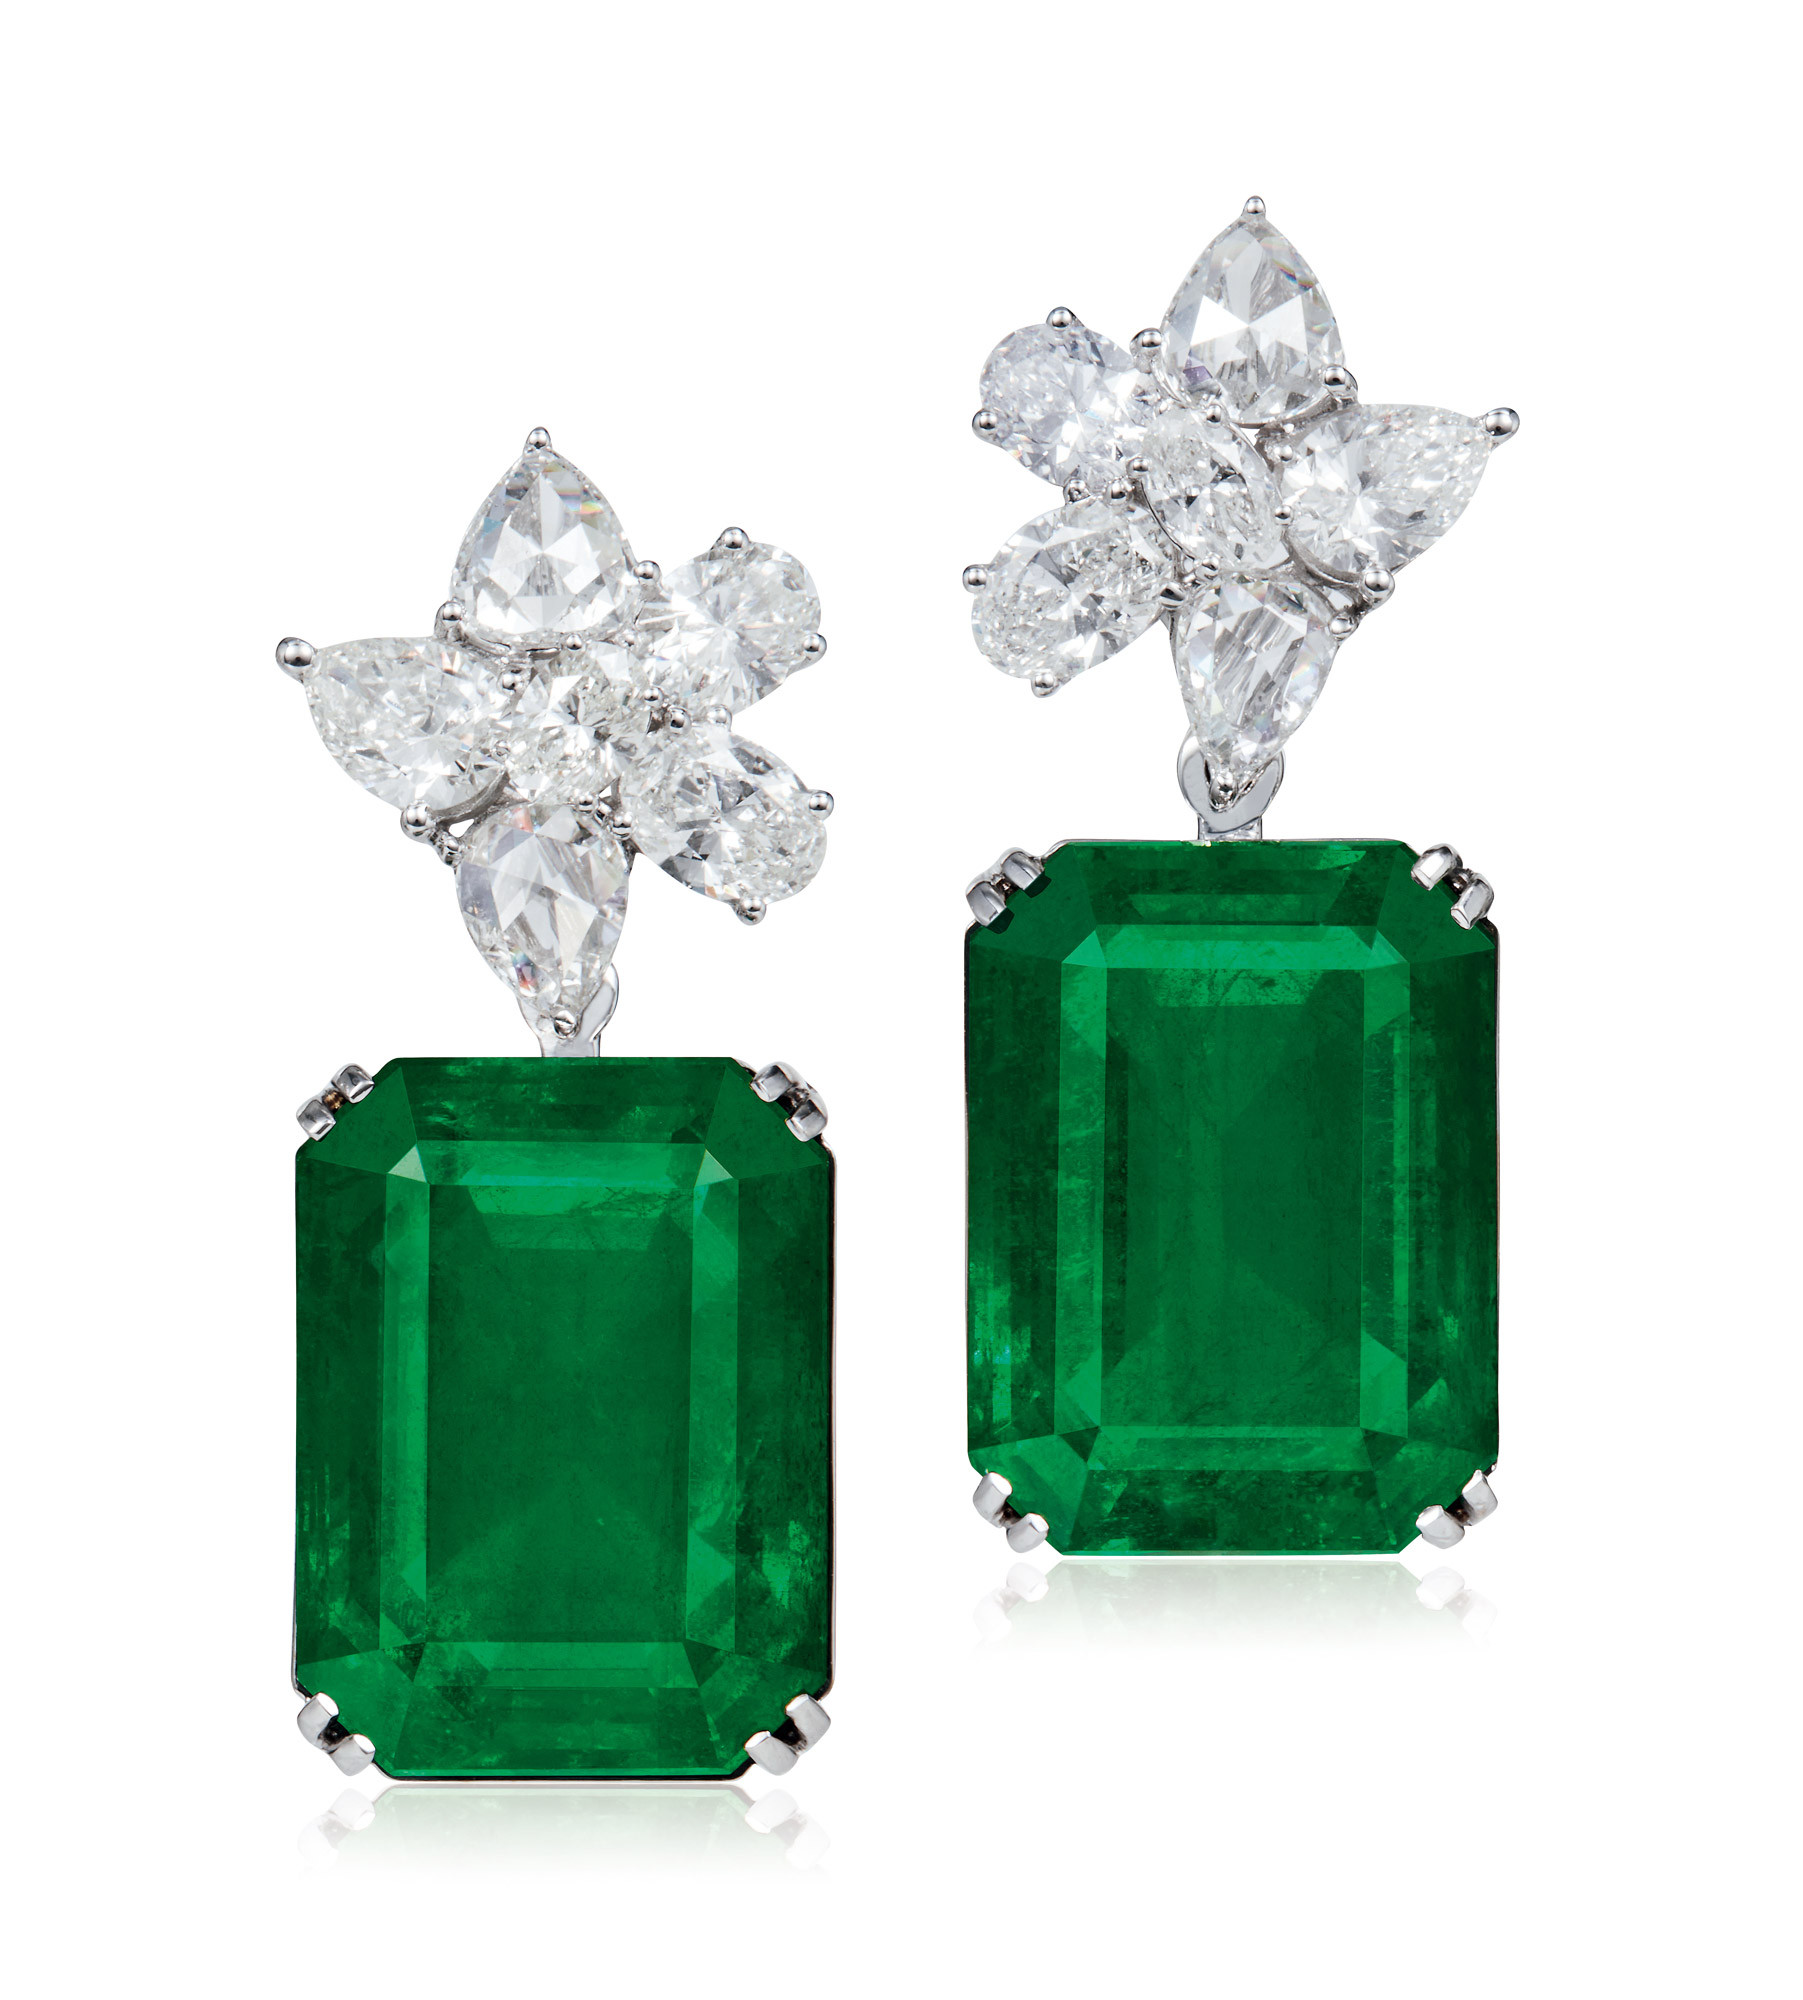 A PAIR OF 19.41 AND 18.74 CARAT ZAMBIAN EMERALD AND DIAMOND EAR PENDANTS